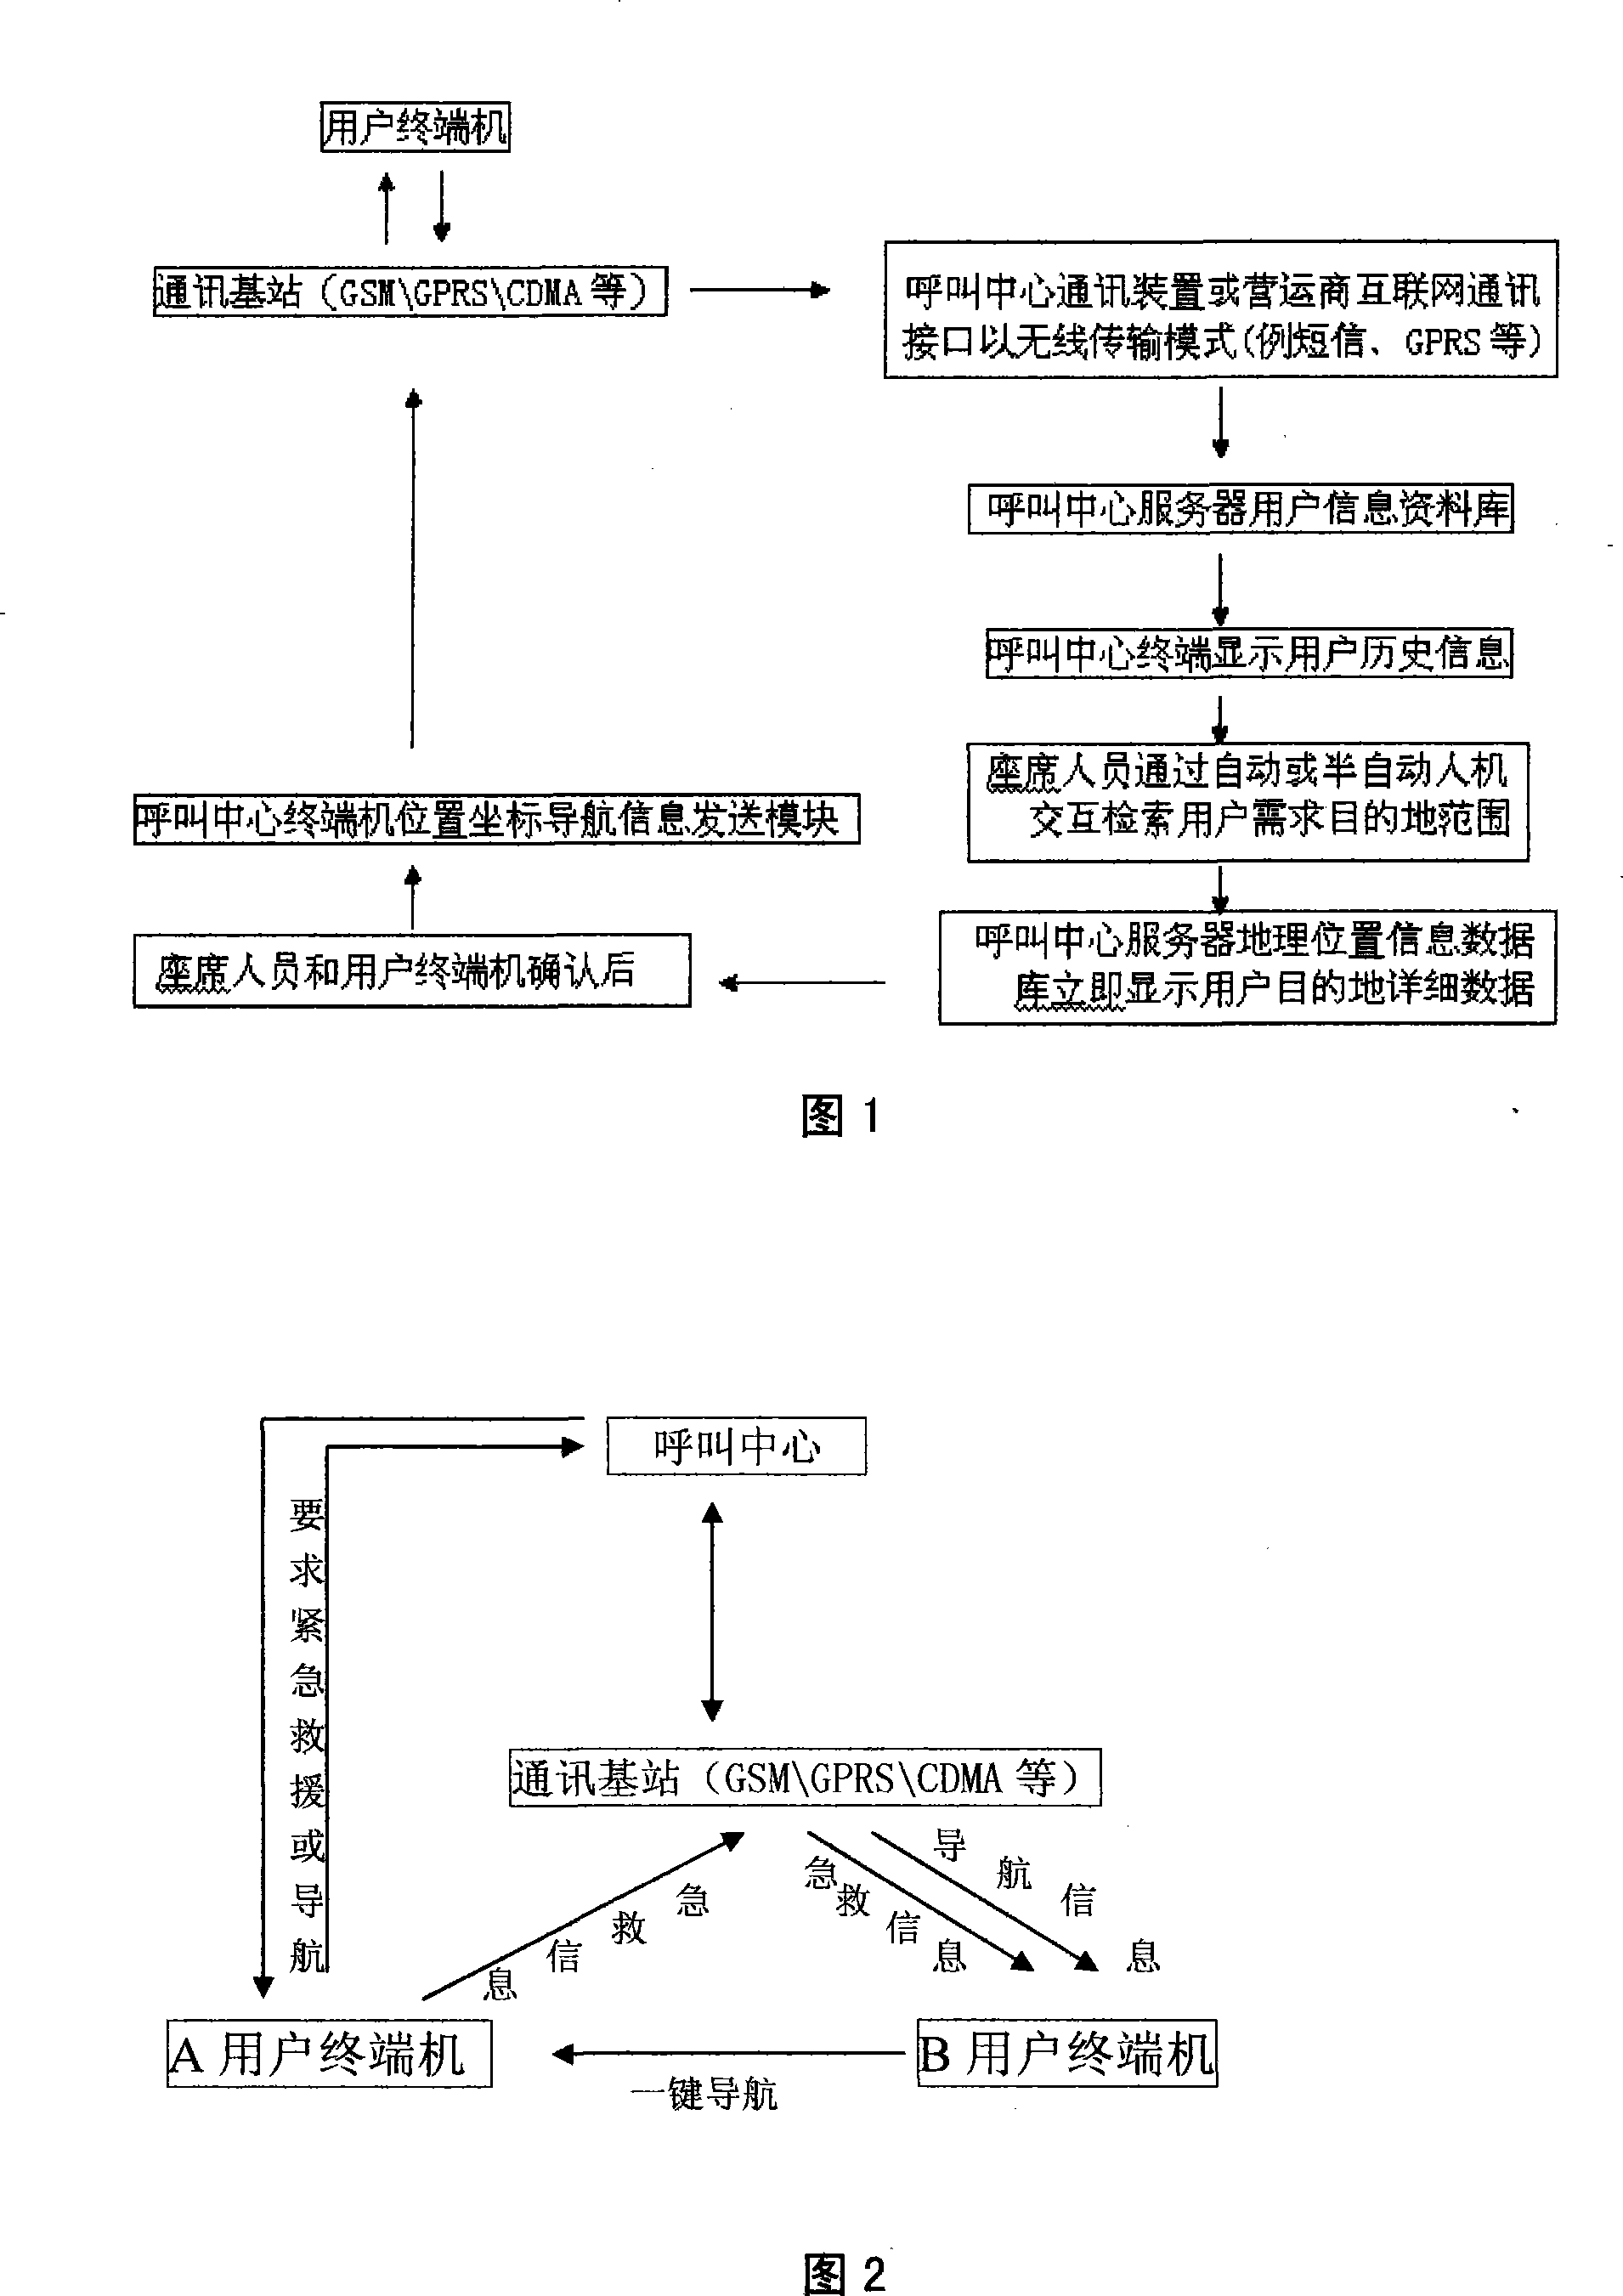 One-key navigation method and apparatus for navigation